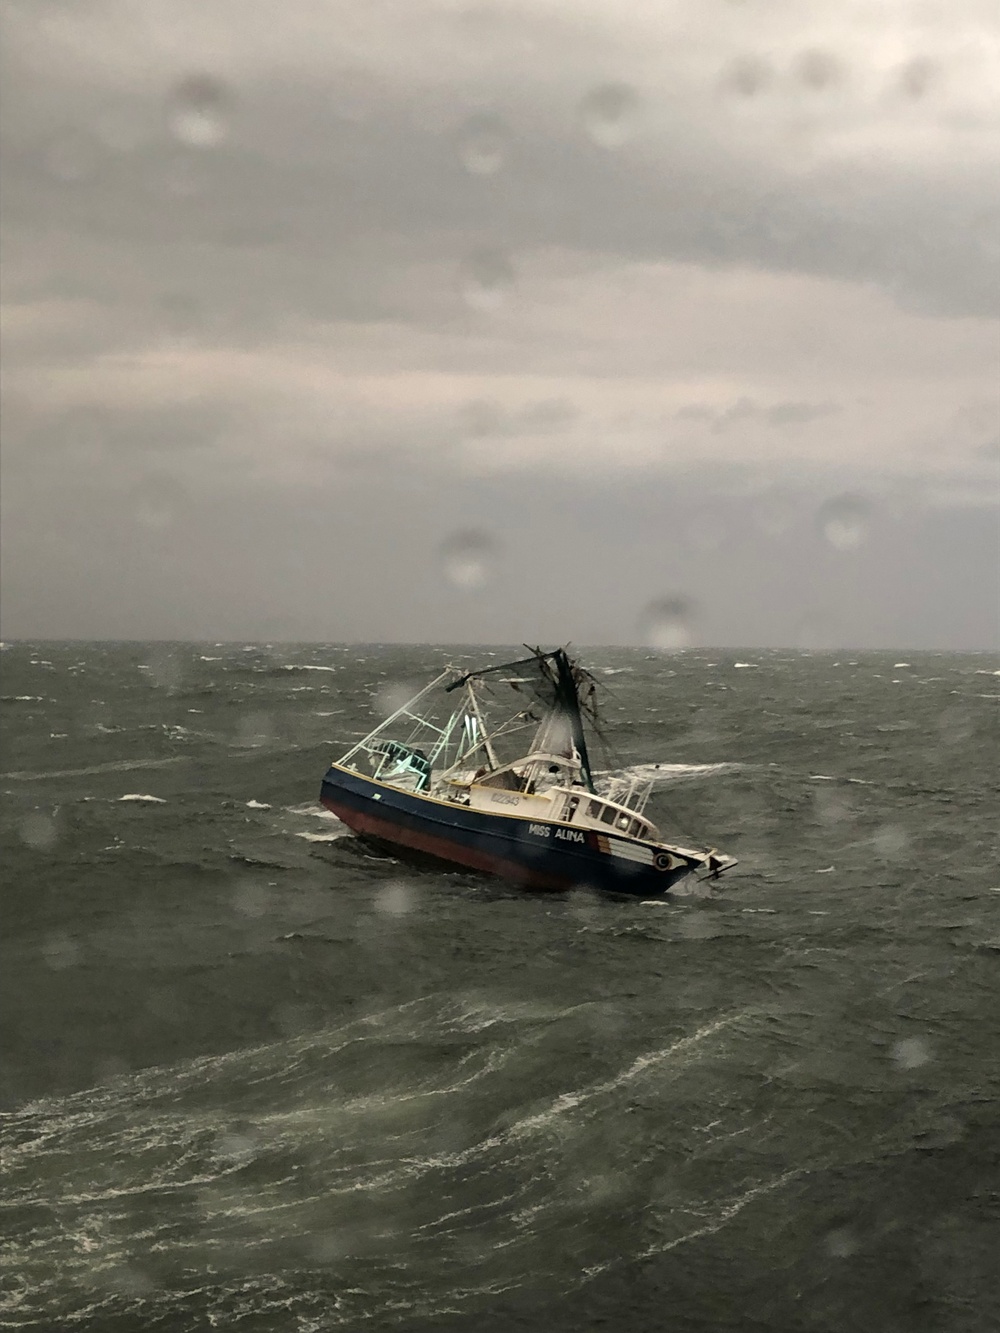 Coast Guard rescues 3 from damaged fishing vessel near Sabine Pass, Texas